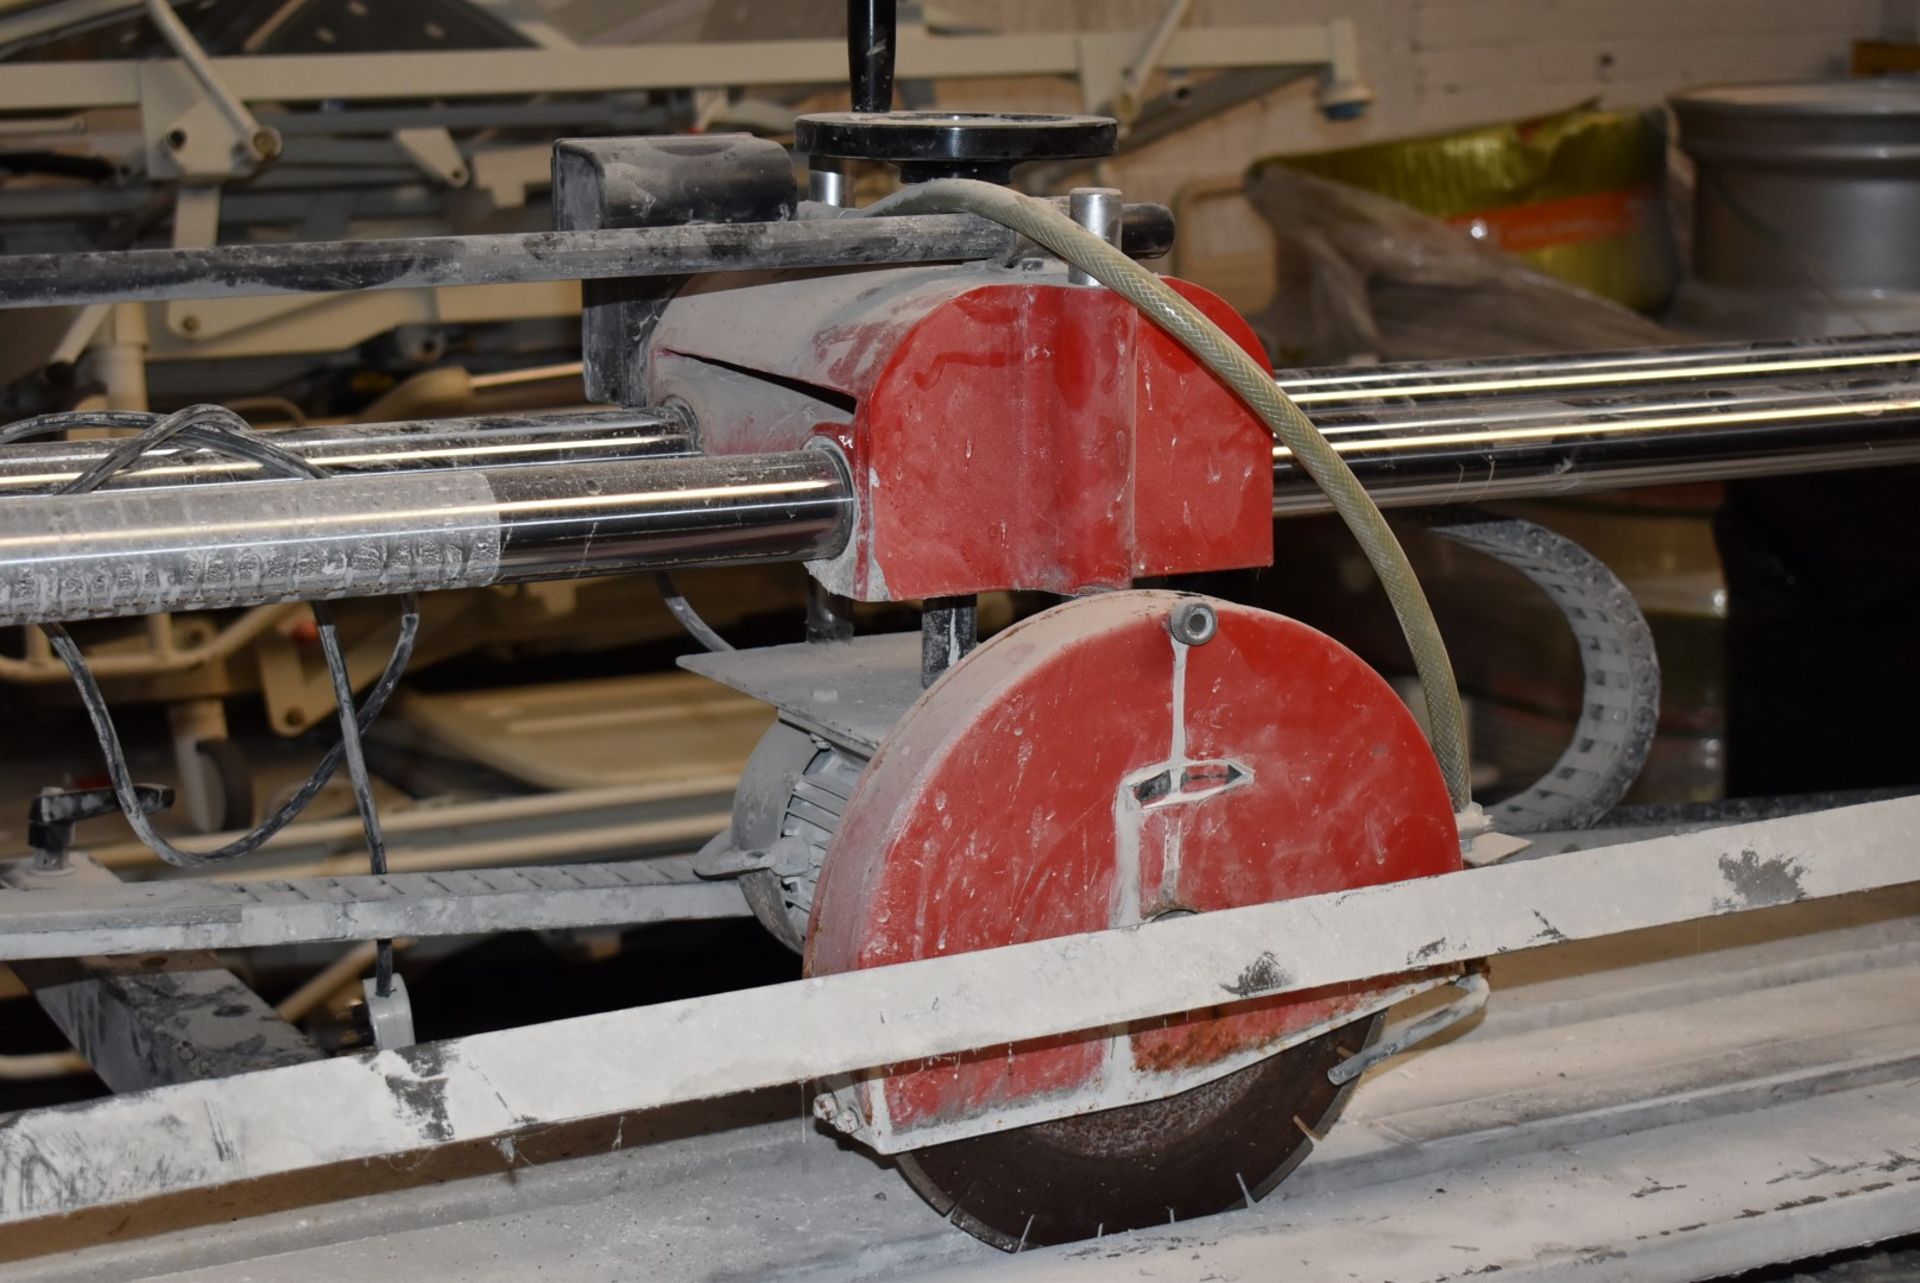 1 x Stone Cutter With 12 Inch Blade and Converyer - Includes Spares Parts Such as Spare Motor - Image 3 of 17